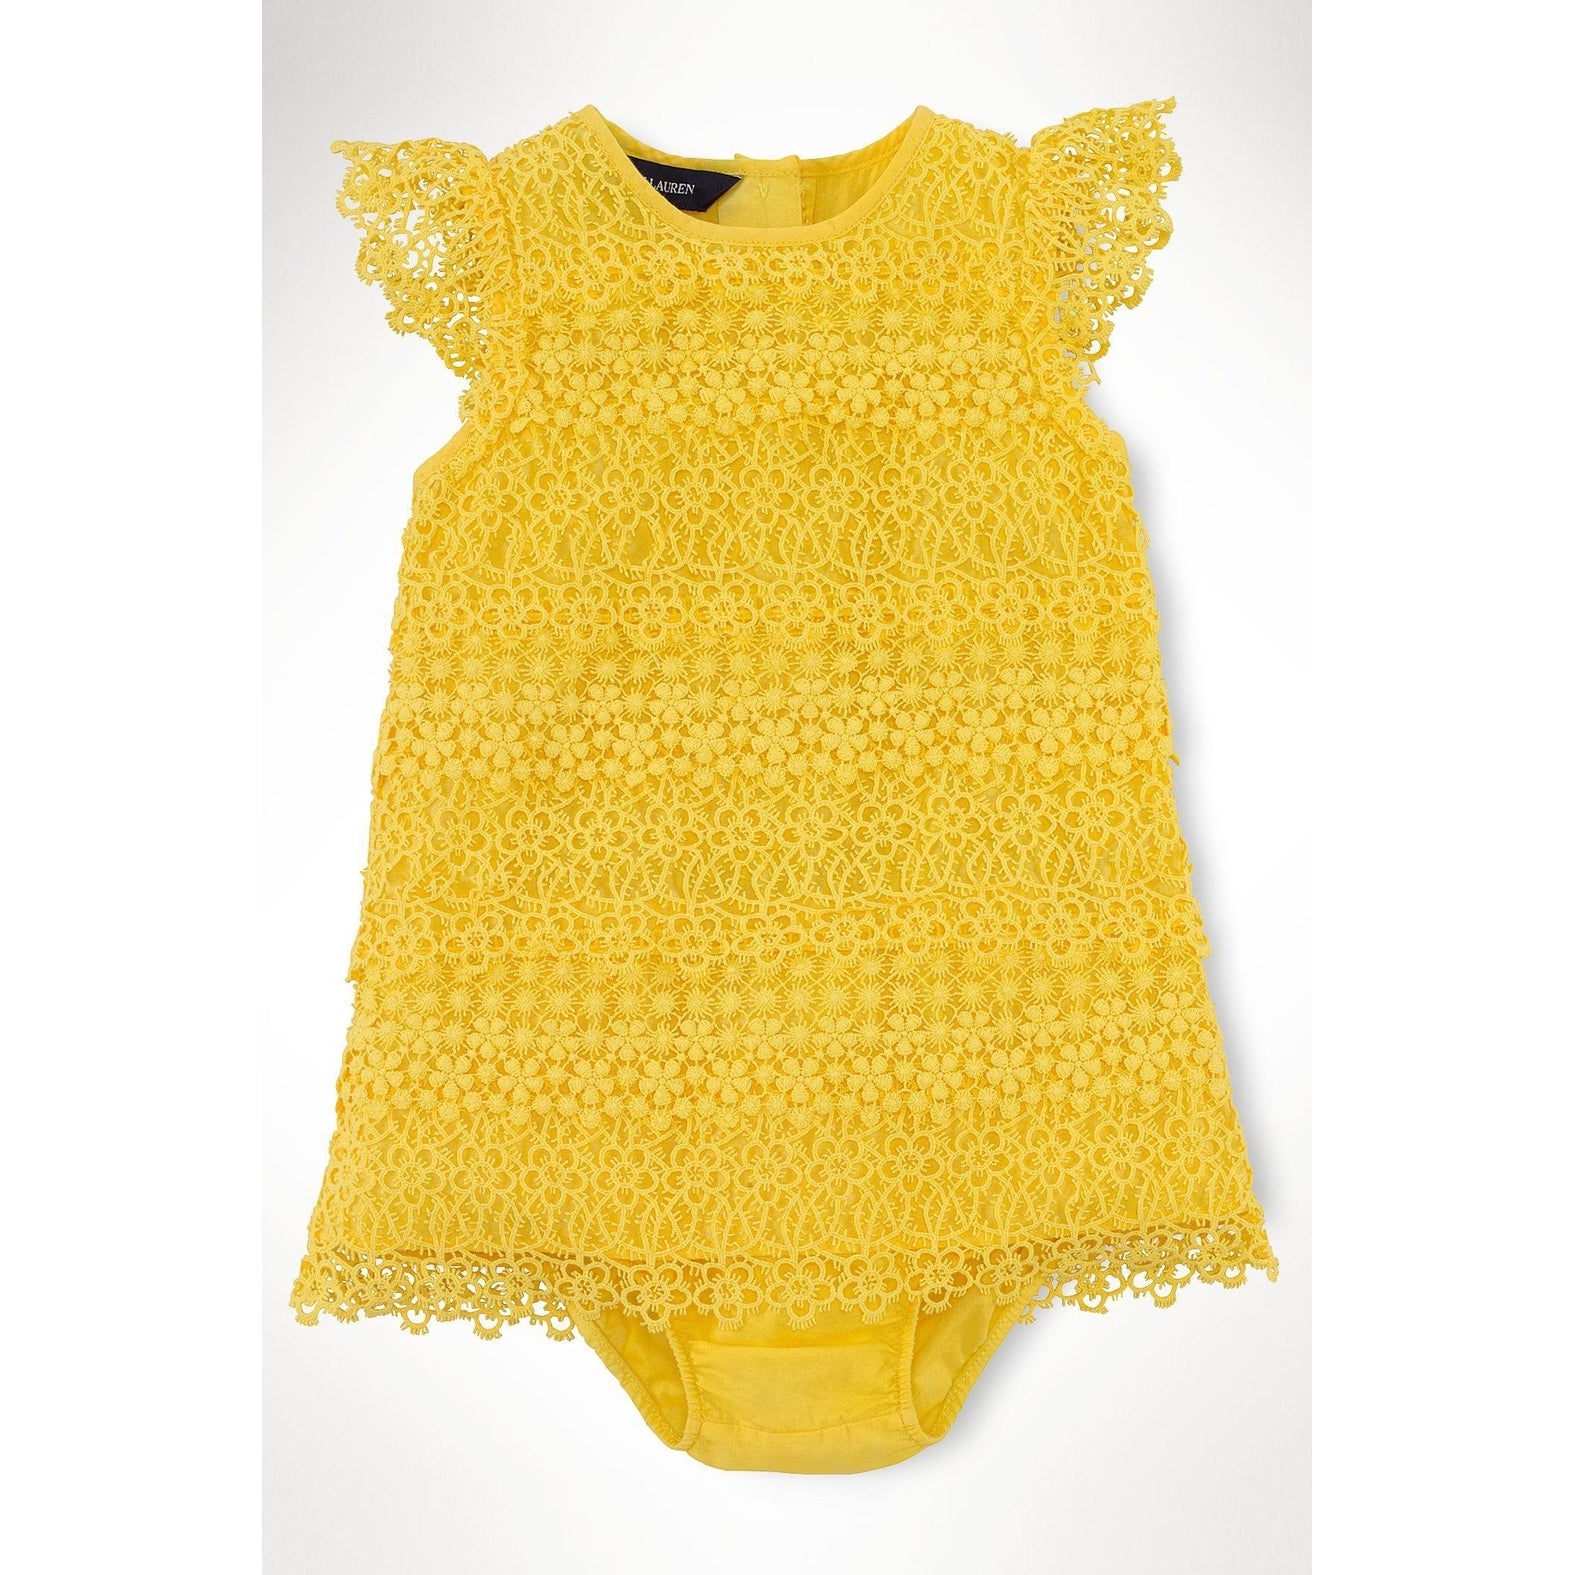 Tiered-Lace Cotton Dress